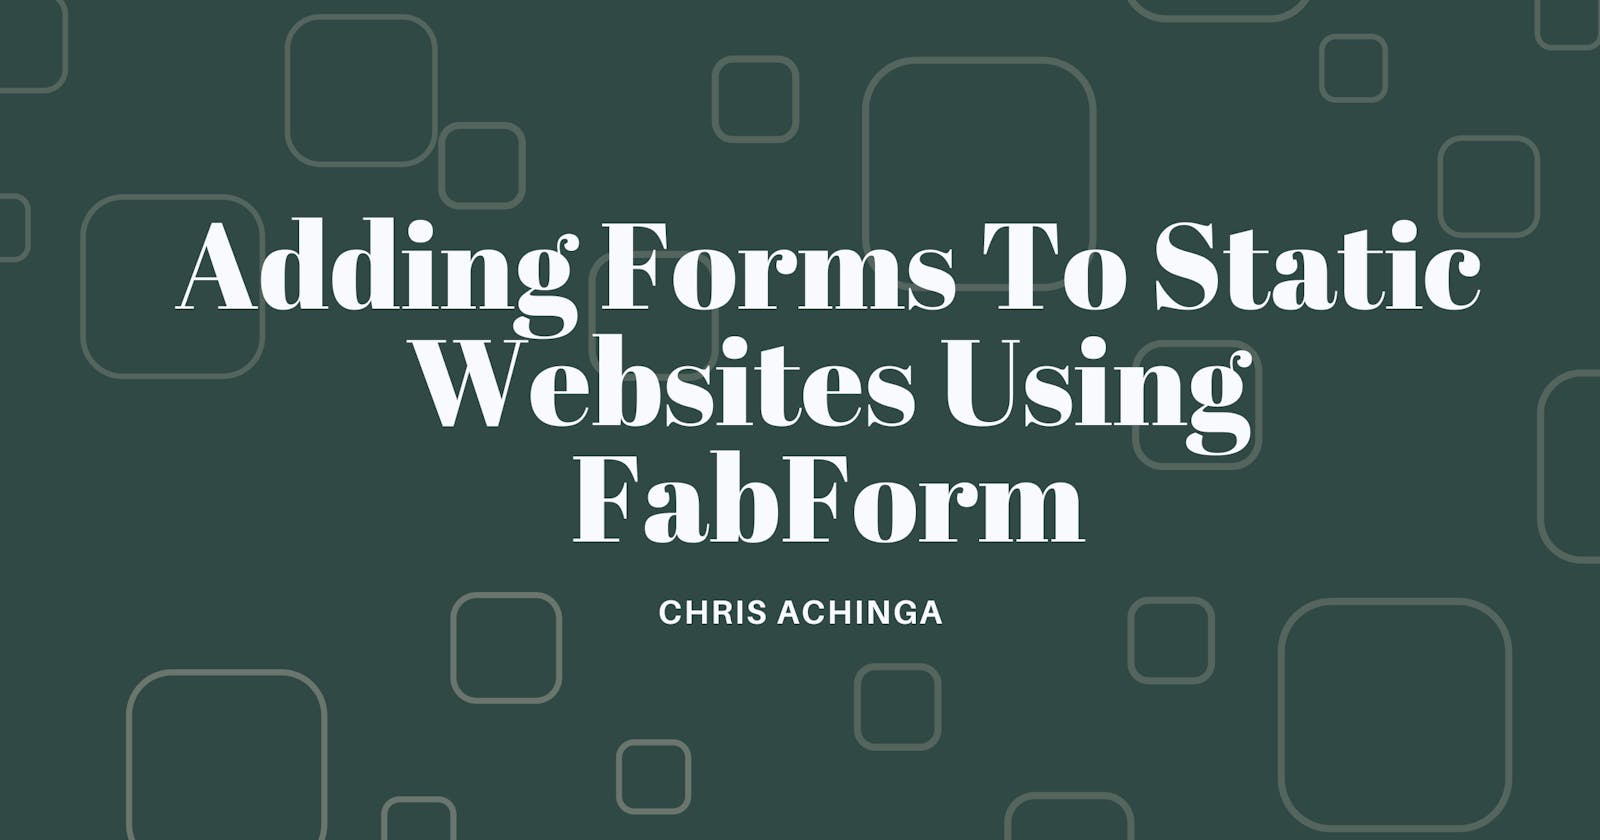 Adding Forms To Static Websites Using FabForm